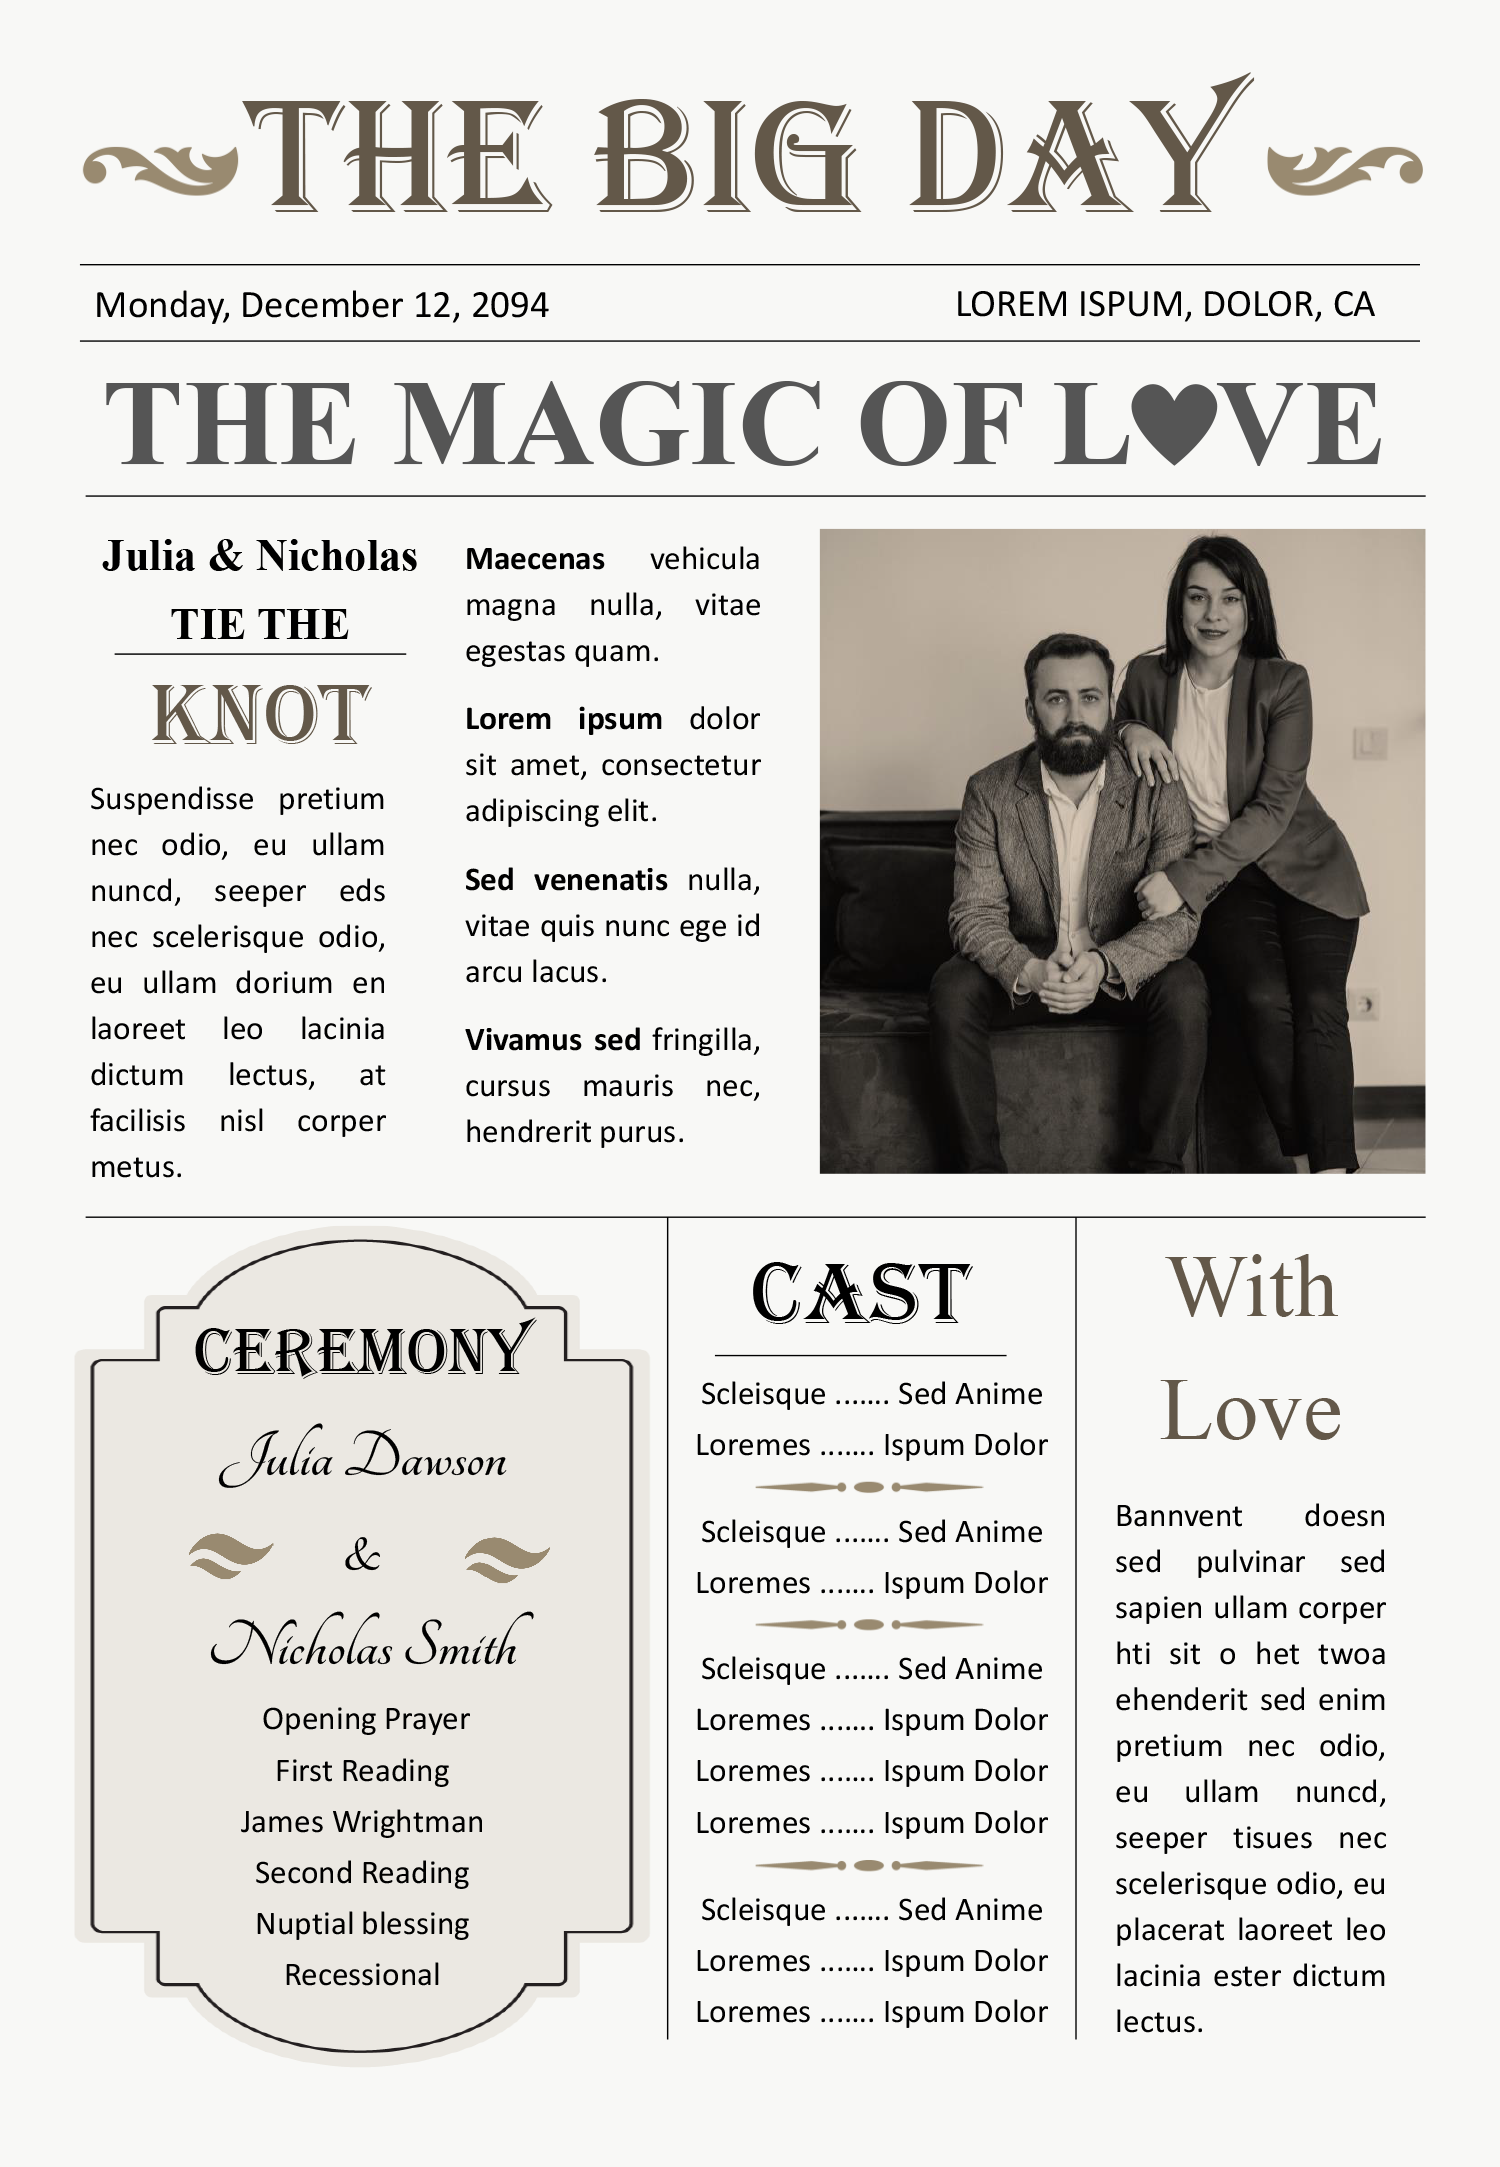 Vintage Wedding Newspaper Template - Front Page